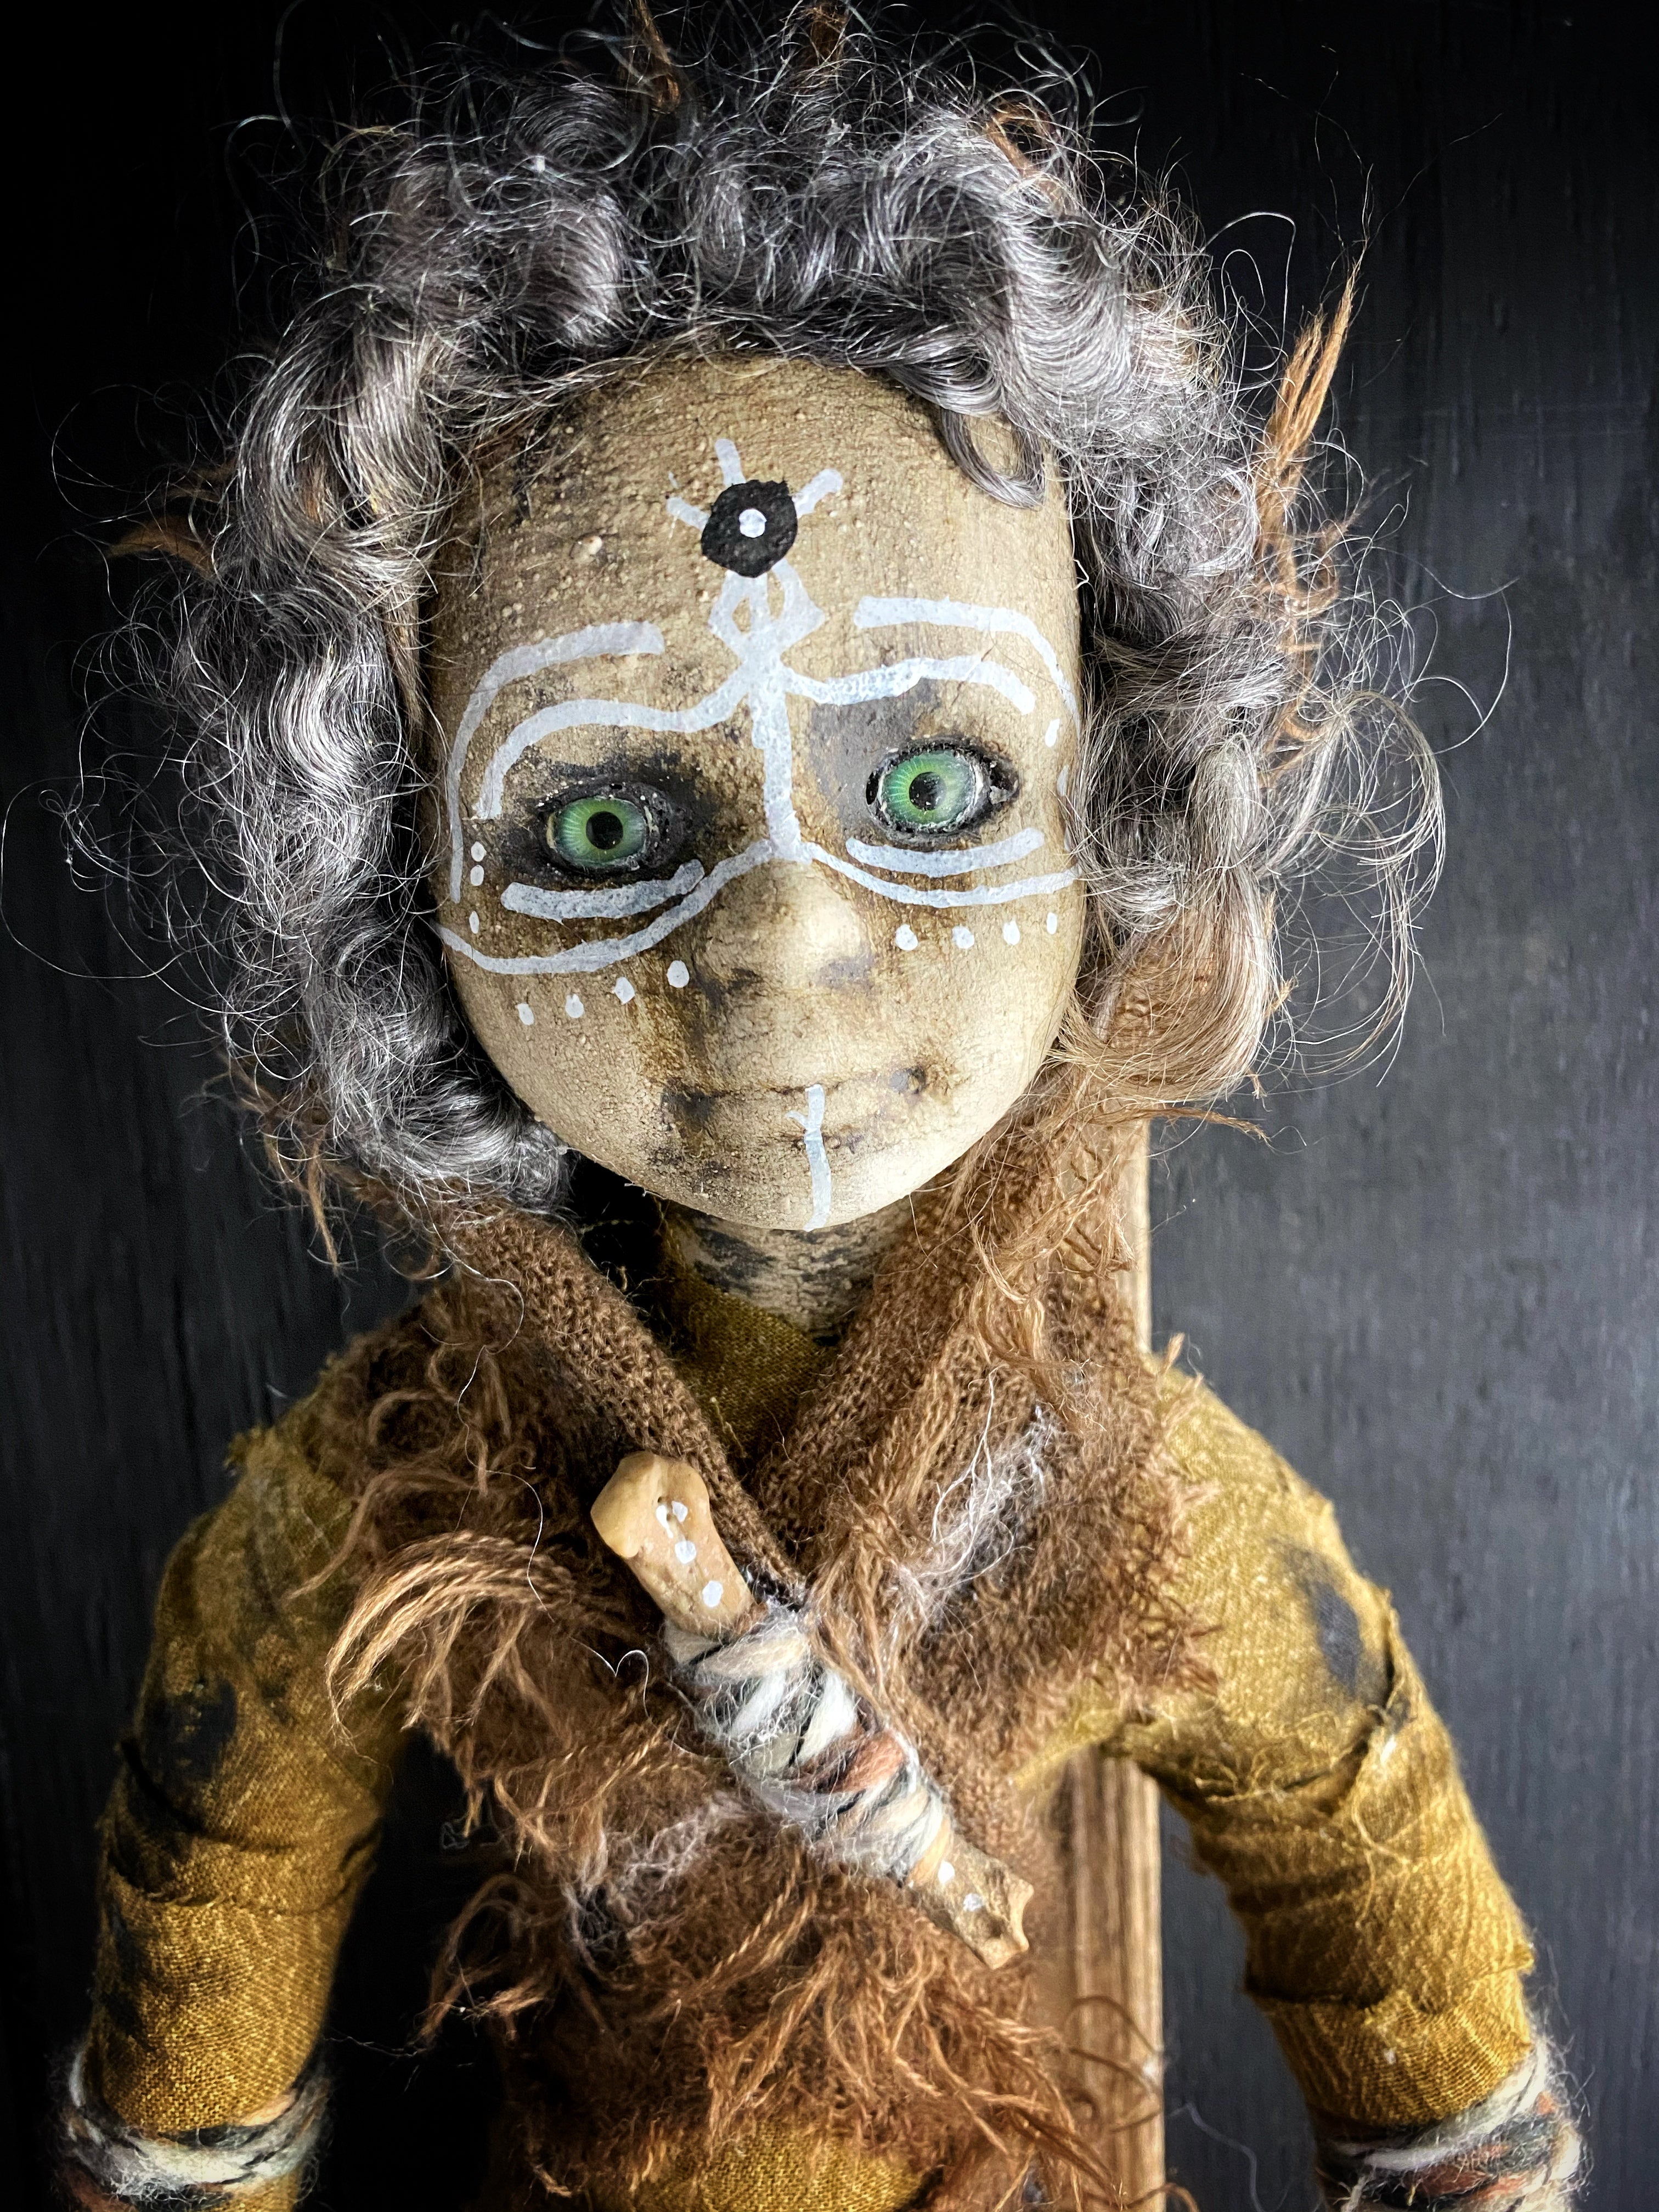 THE ORACLE - Intuitively Crafted Spirit Doll